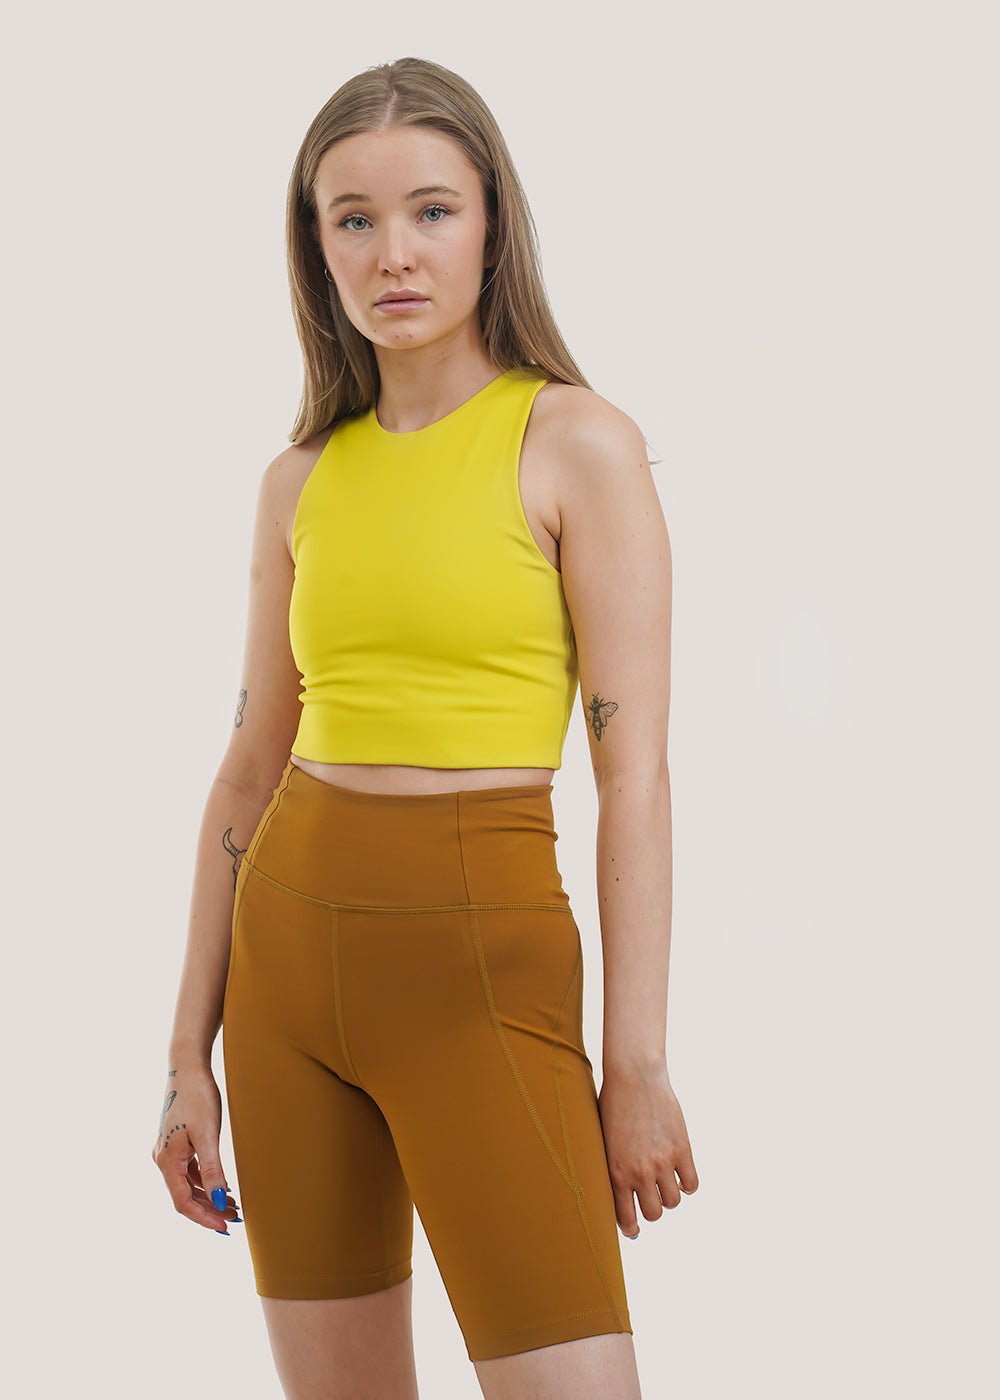 https://newclassics.ca/cdn/shop/products/girlfriend-collective-chartreuse-dylan-bra-new-classics-studios-sustainable-and-ethical-fashion-canada-932853_1000x.jpg?v=1687281757